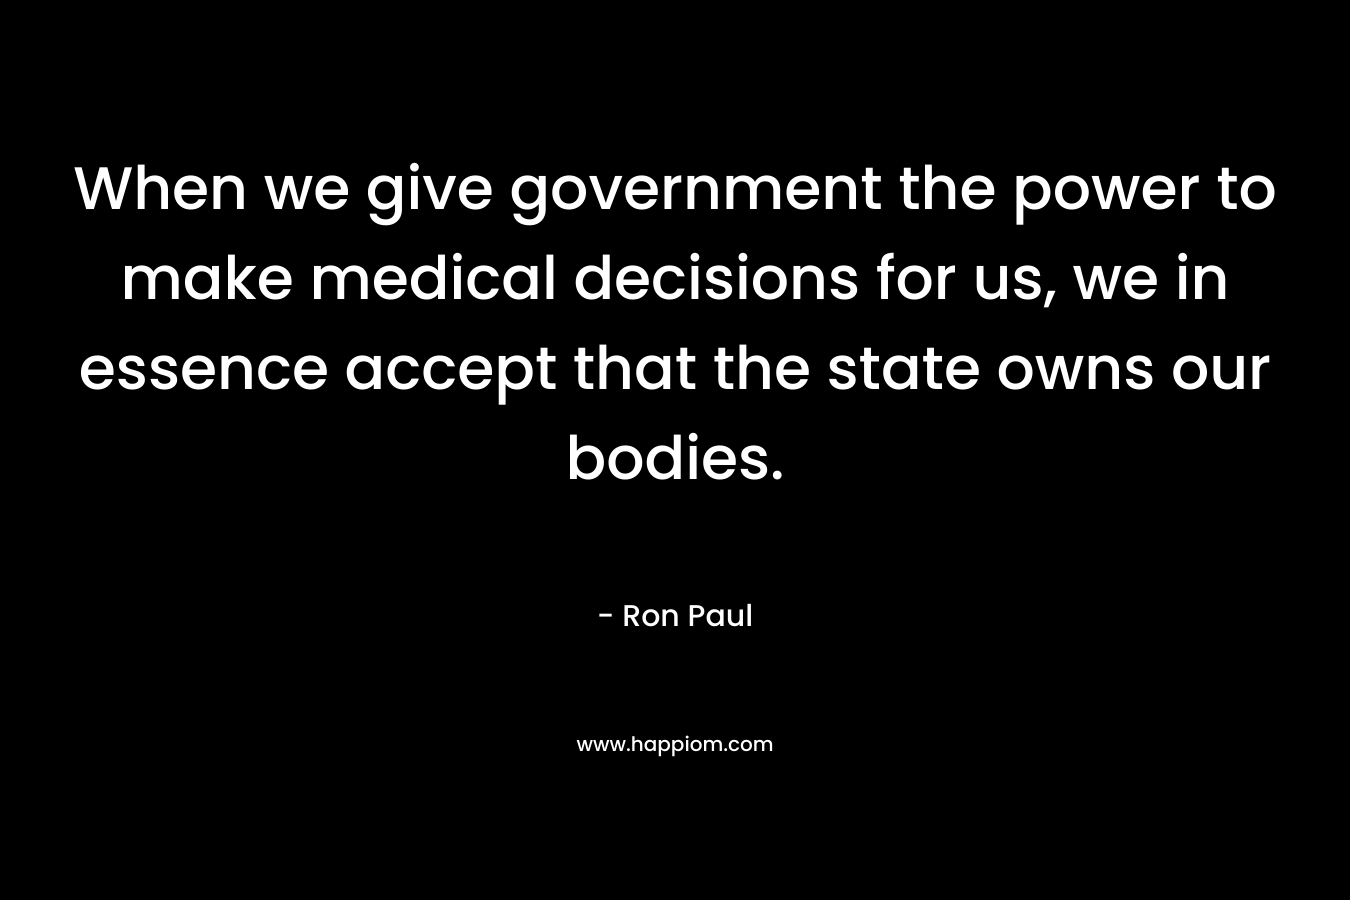 When we give government the power to make medical decisions for us, we in essence accept that the state owns our bodies.